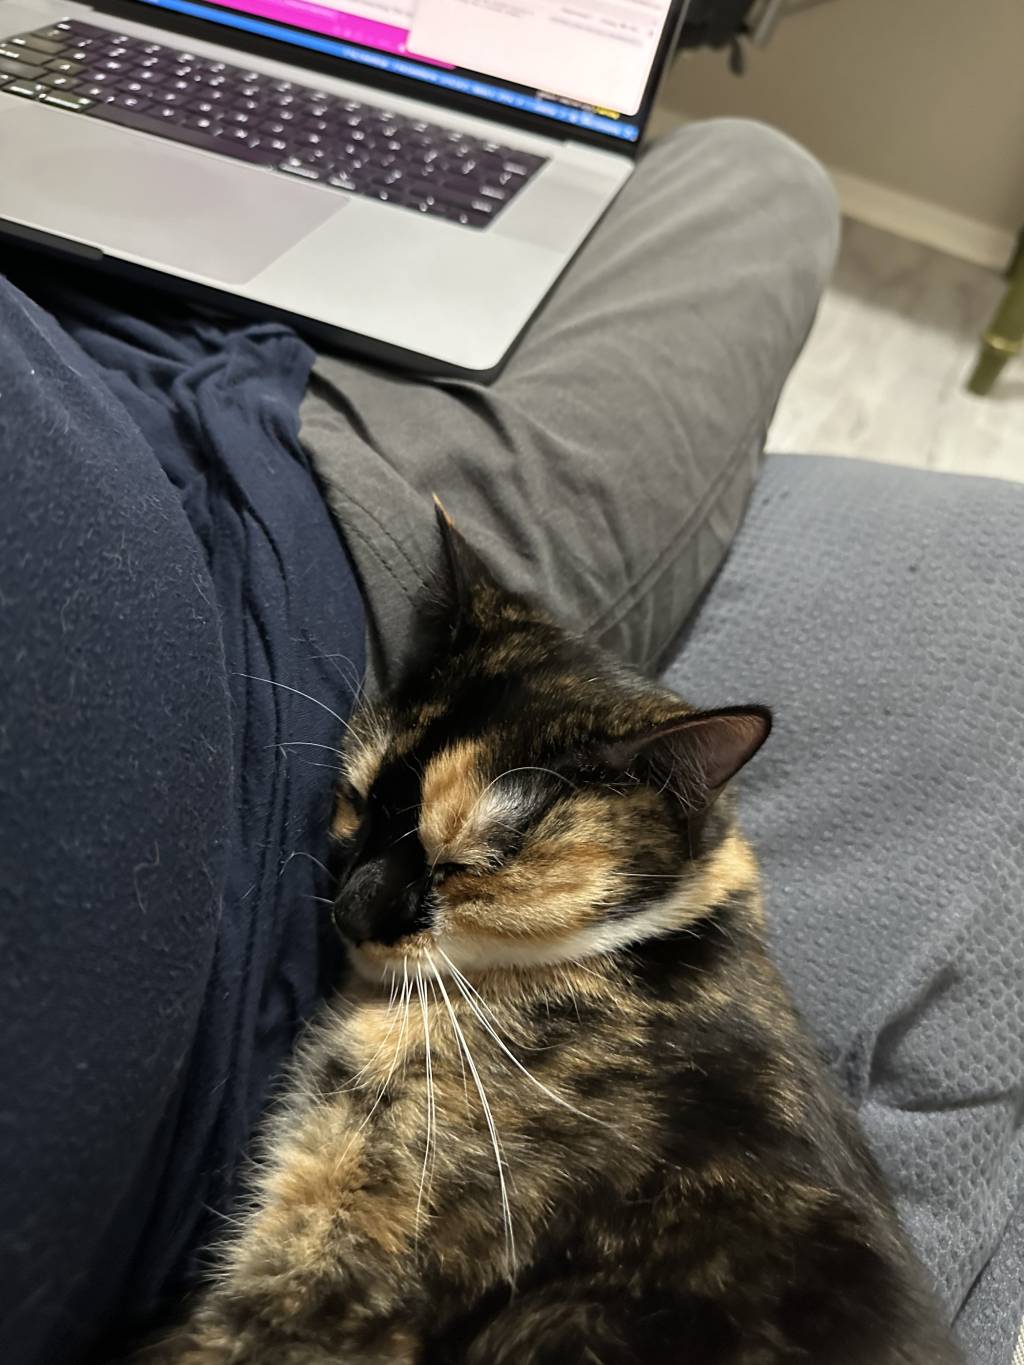 A calico cat sleeps curled up against a leg with a computer in the background